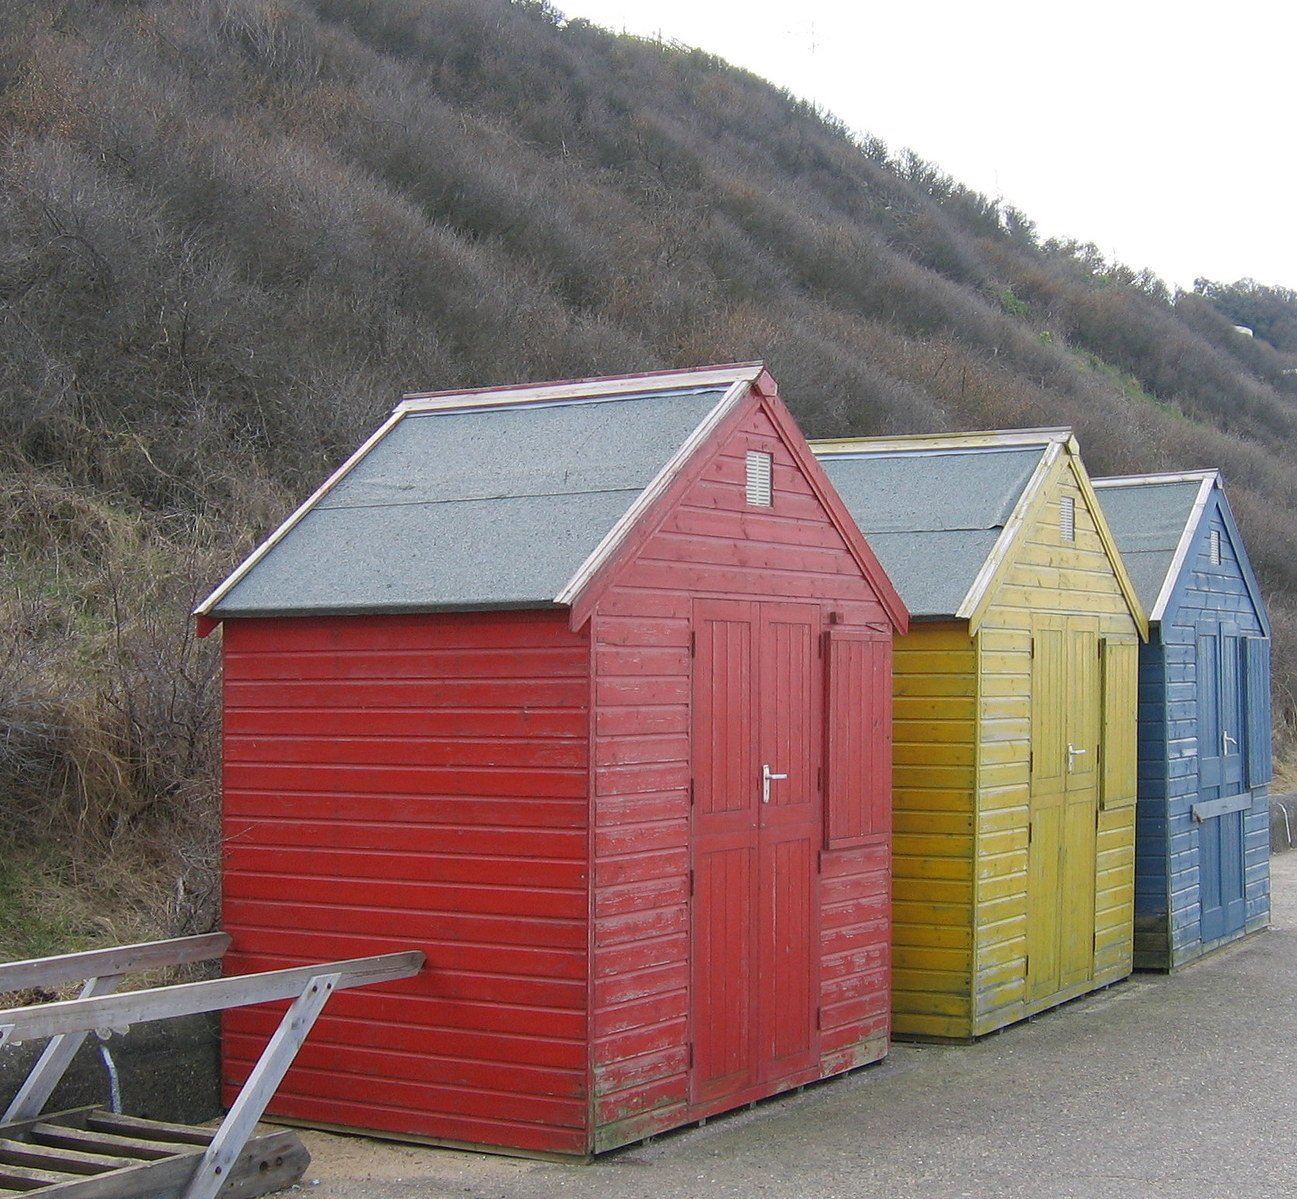 a group of colorful beach huts next to the side of a mountain